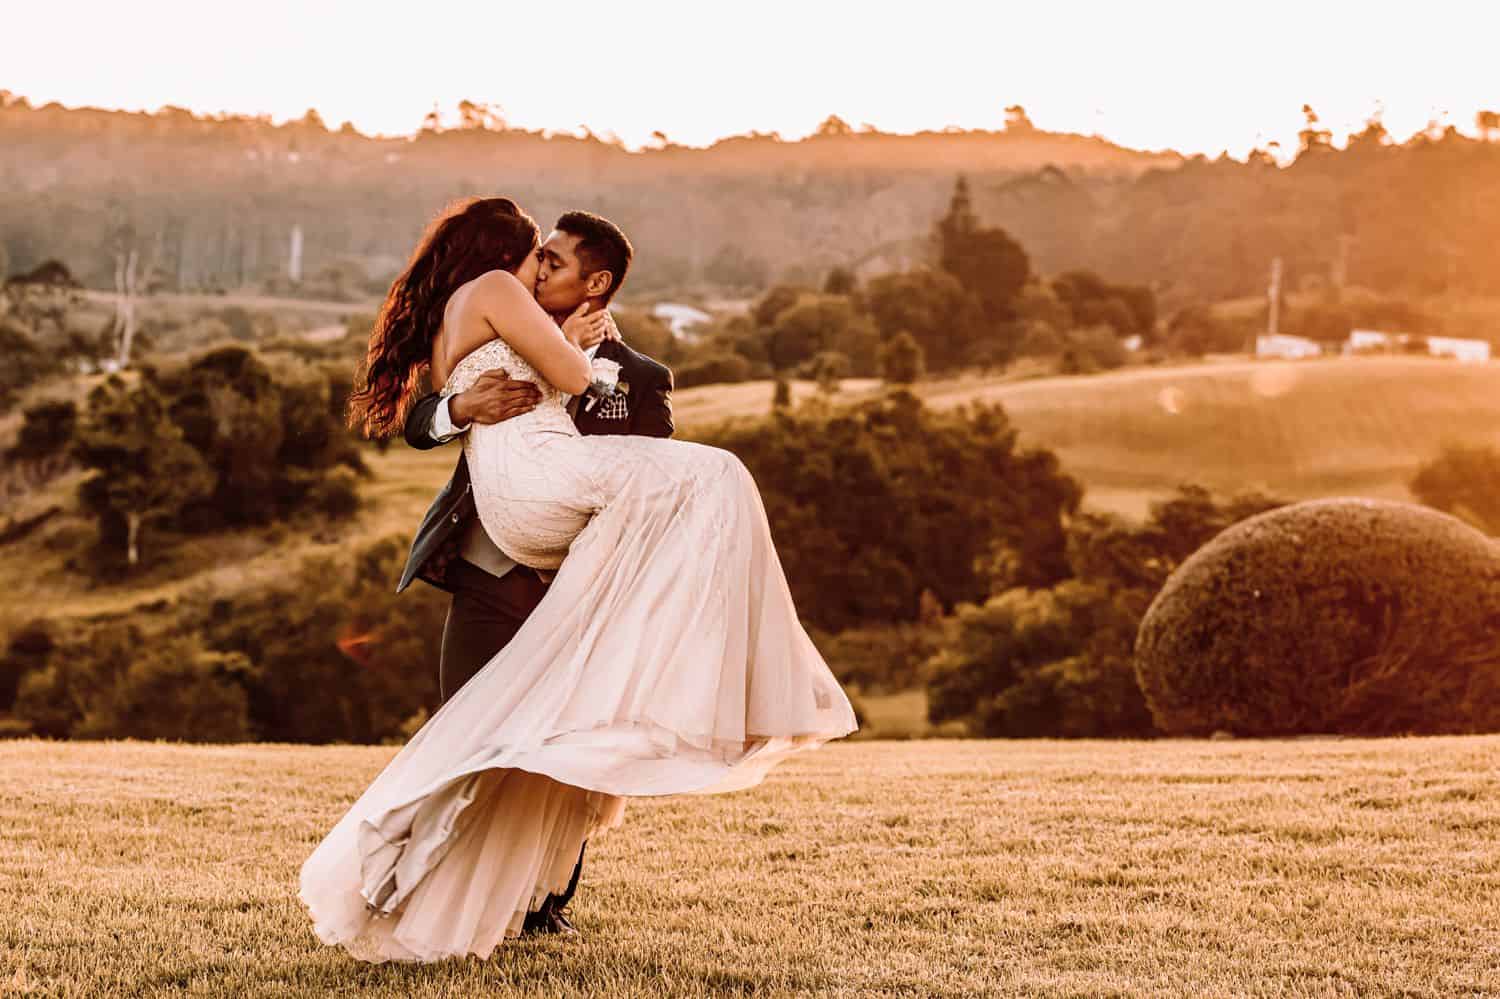 Groom carries bride in a flowing dress in a cradle-hold while they kiss.